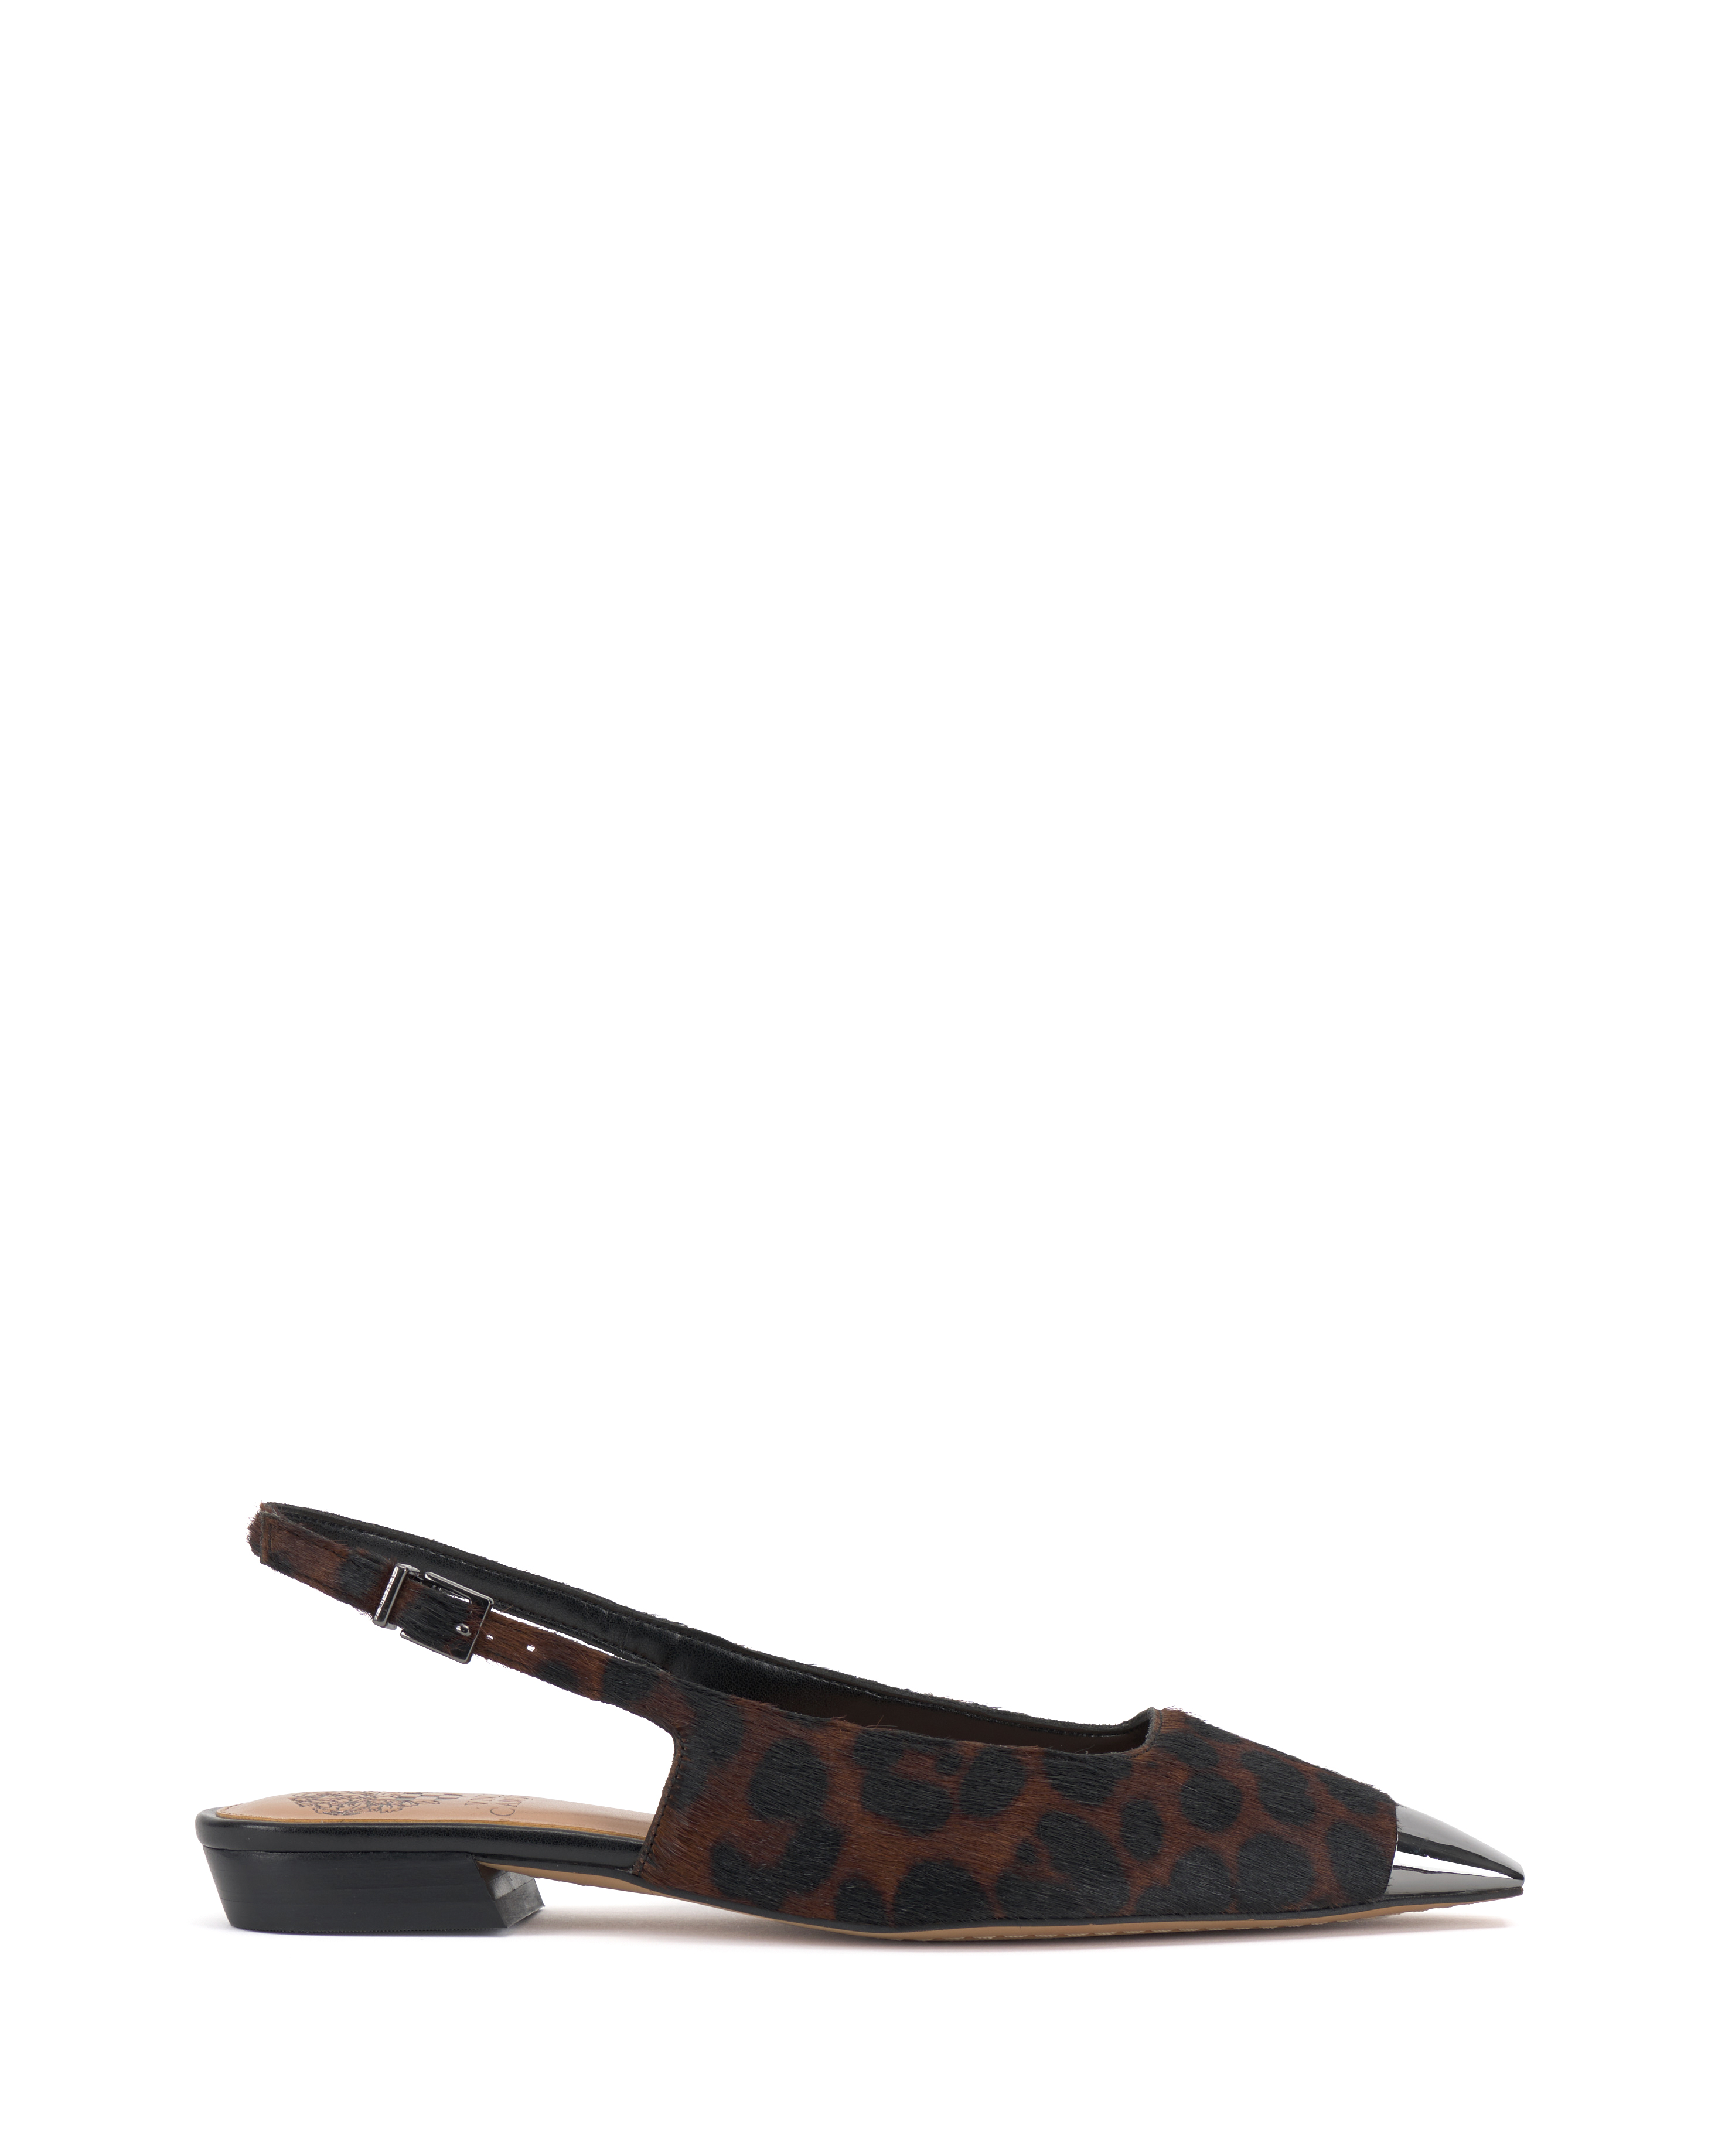 Women's Vince Camuto Sellyn Singback Flats Size 6 Deep Natural Leopard Print